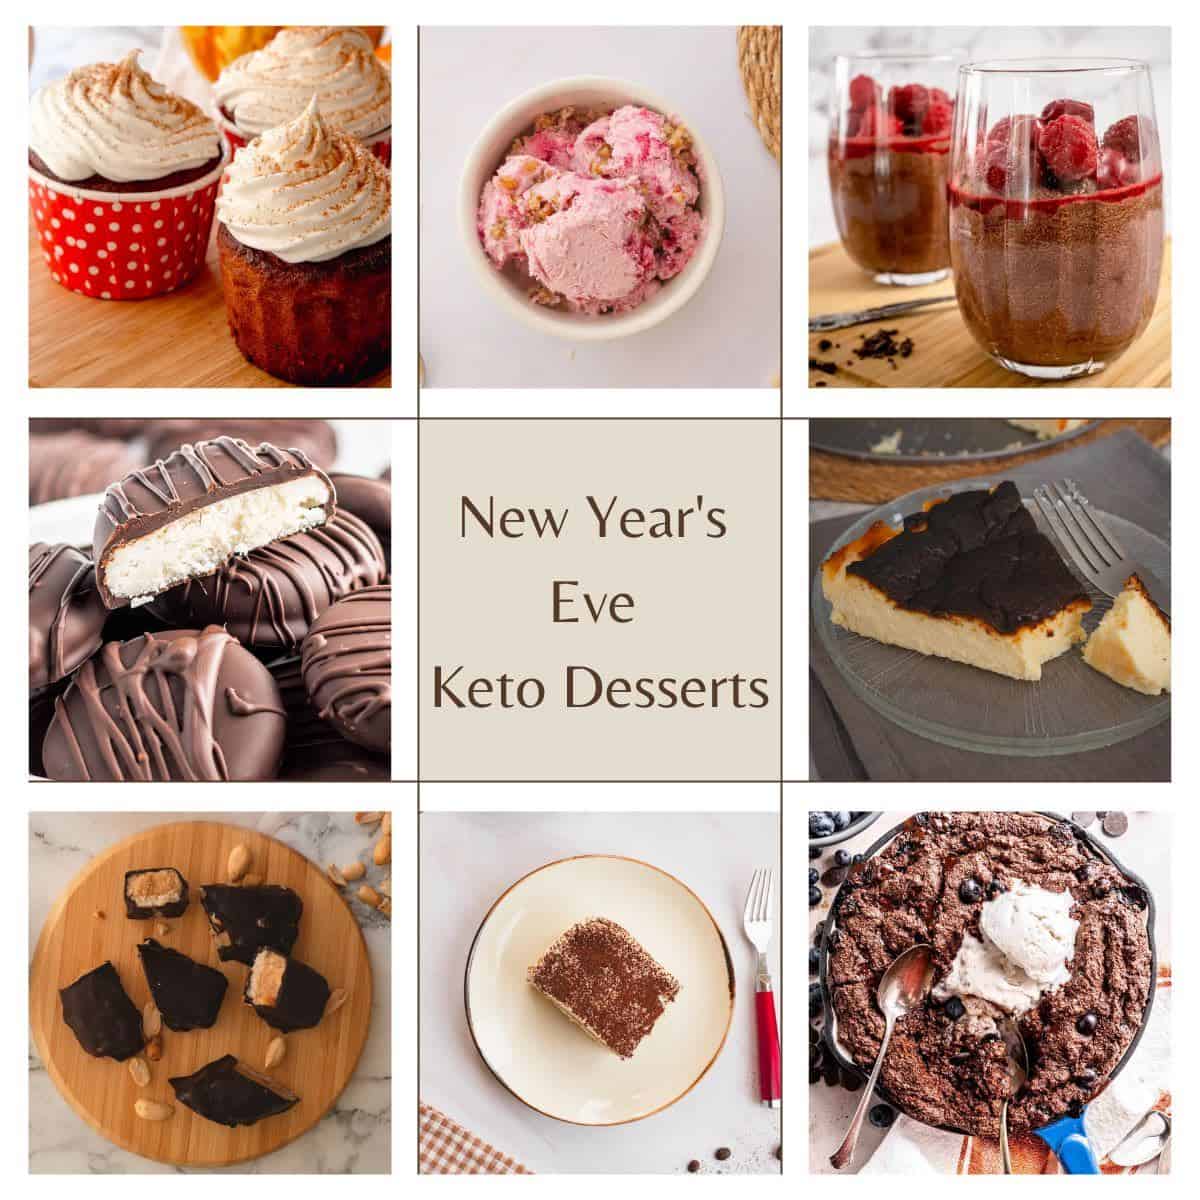 A collection of keto dessert recipes for the New Year's Eve party.